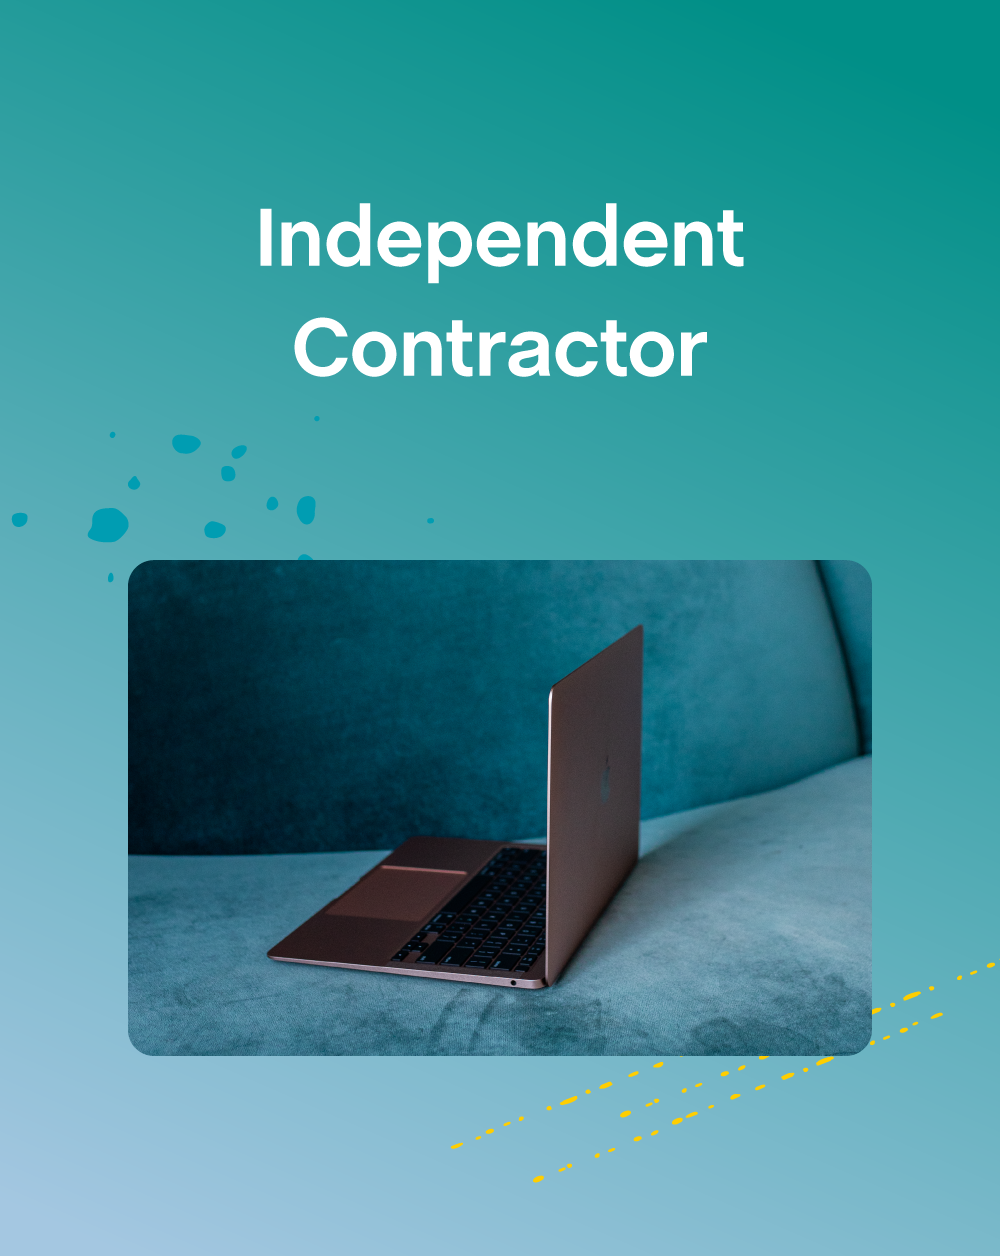 Independent Contractor Contract Template - The Contract Shop®